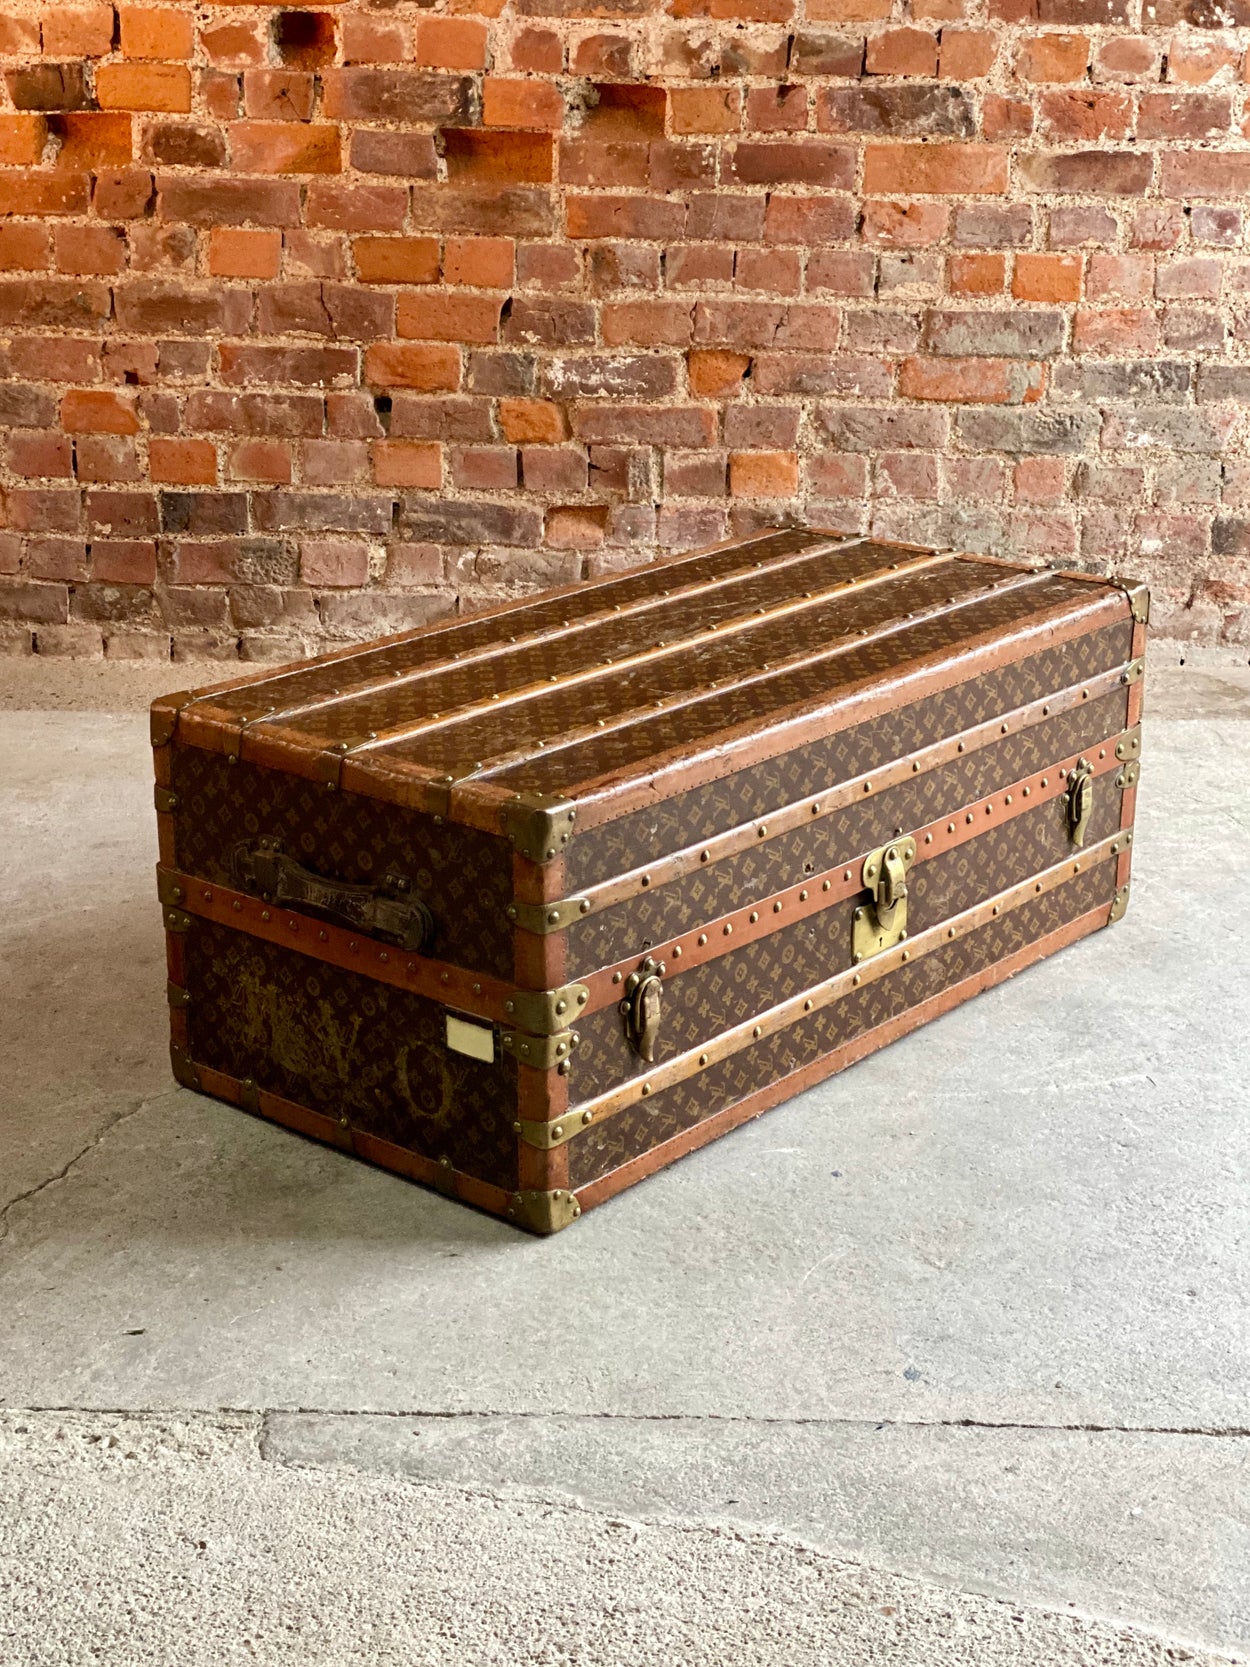 Wardrobe Louis Vuitton Trunk For Sale at 1stDibs  louis vuitton closet, louis  vuitton wardrobe trunk, antique louis vuitton trunk value